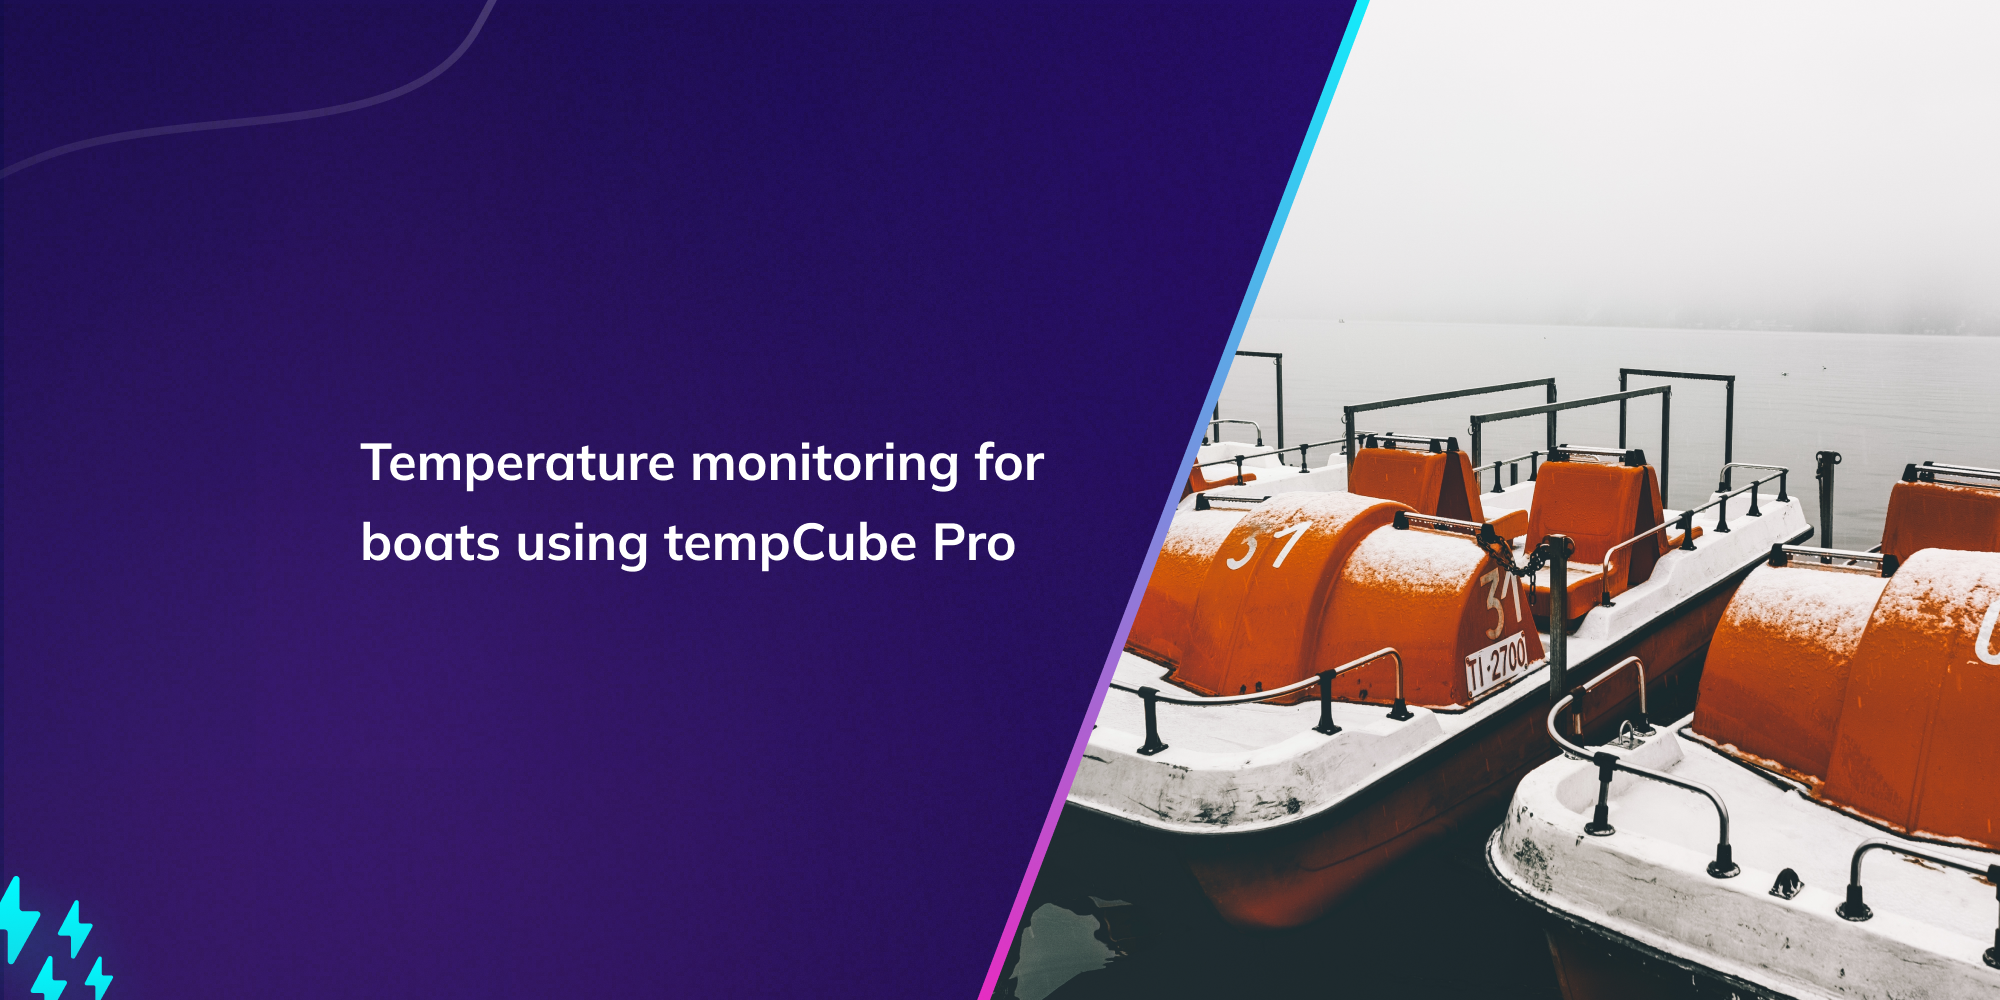 Temperature monitoring for boats using tempCube Pro